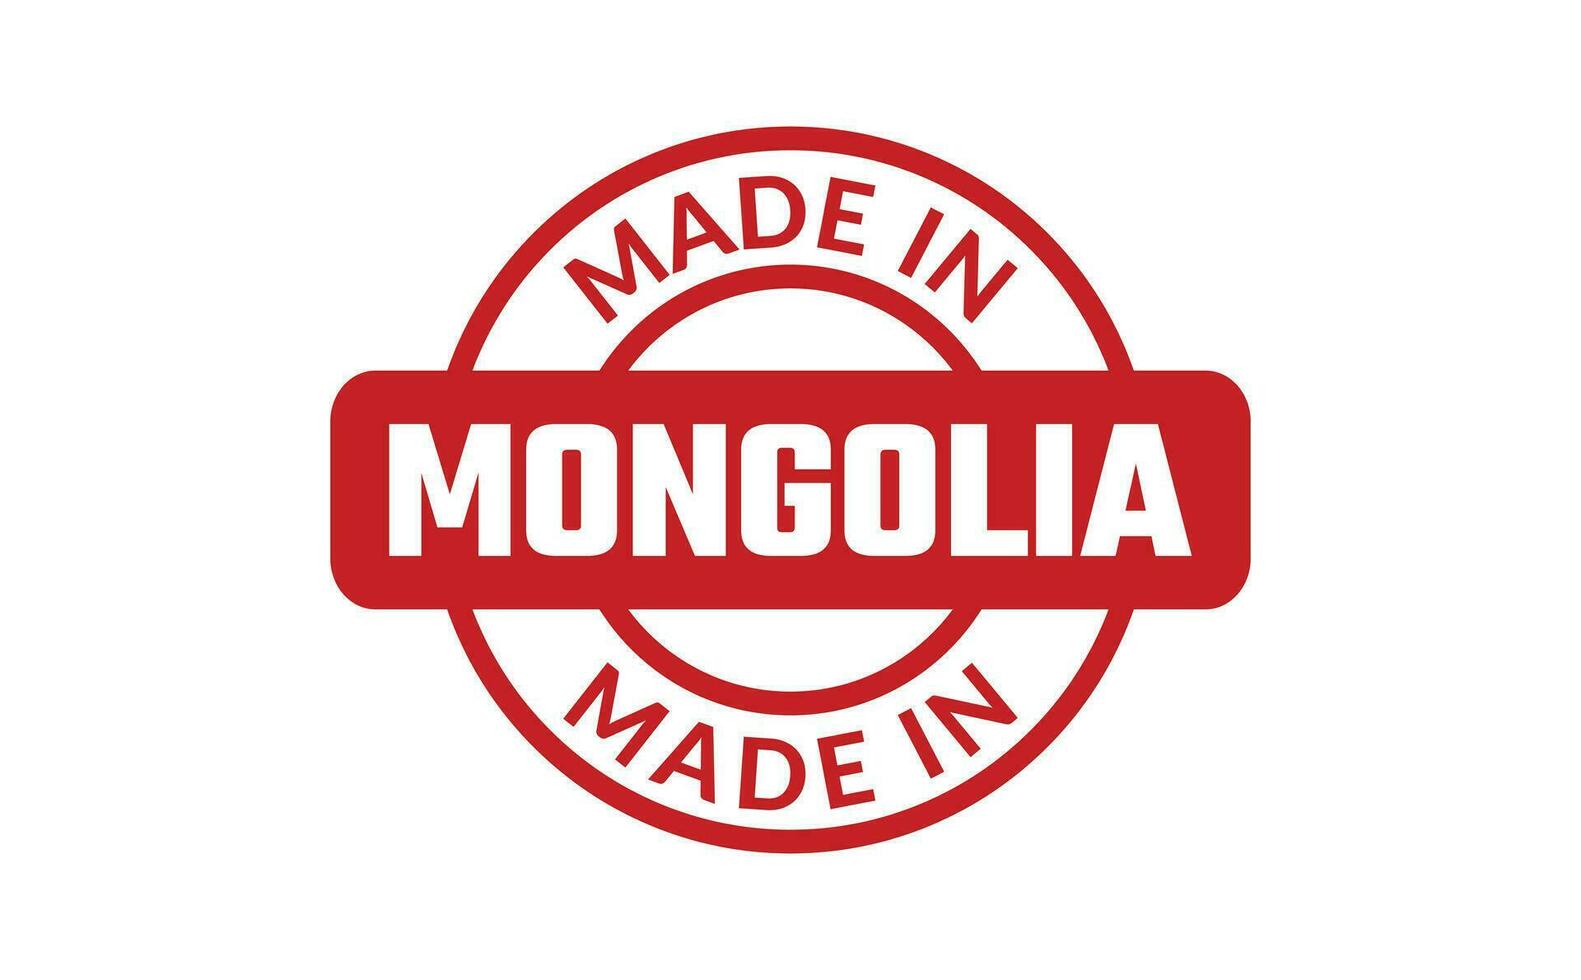 Made In Mongolia Rubber Stamp vector